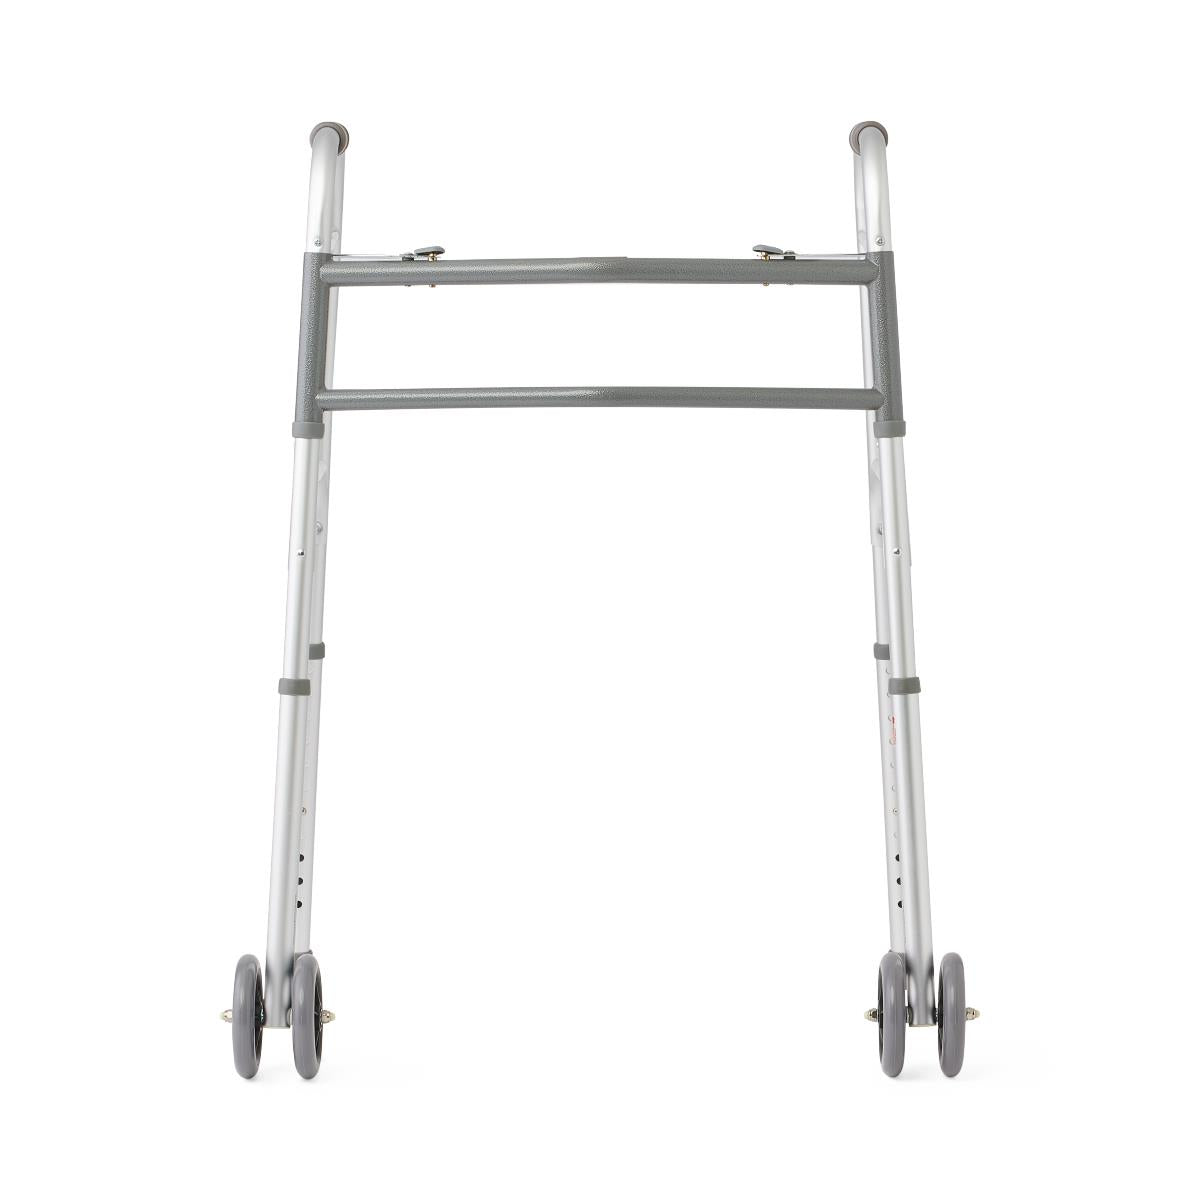 Deluxe Bariatric Walker, Extra-Wide (Single)